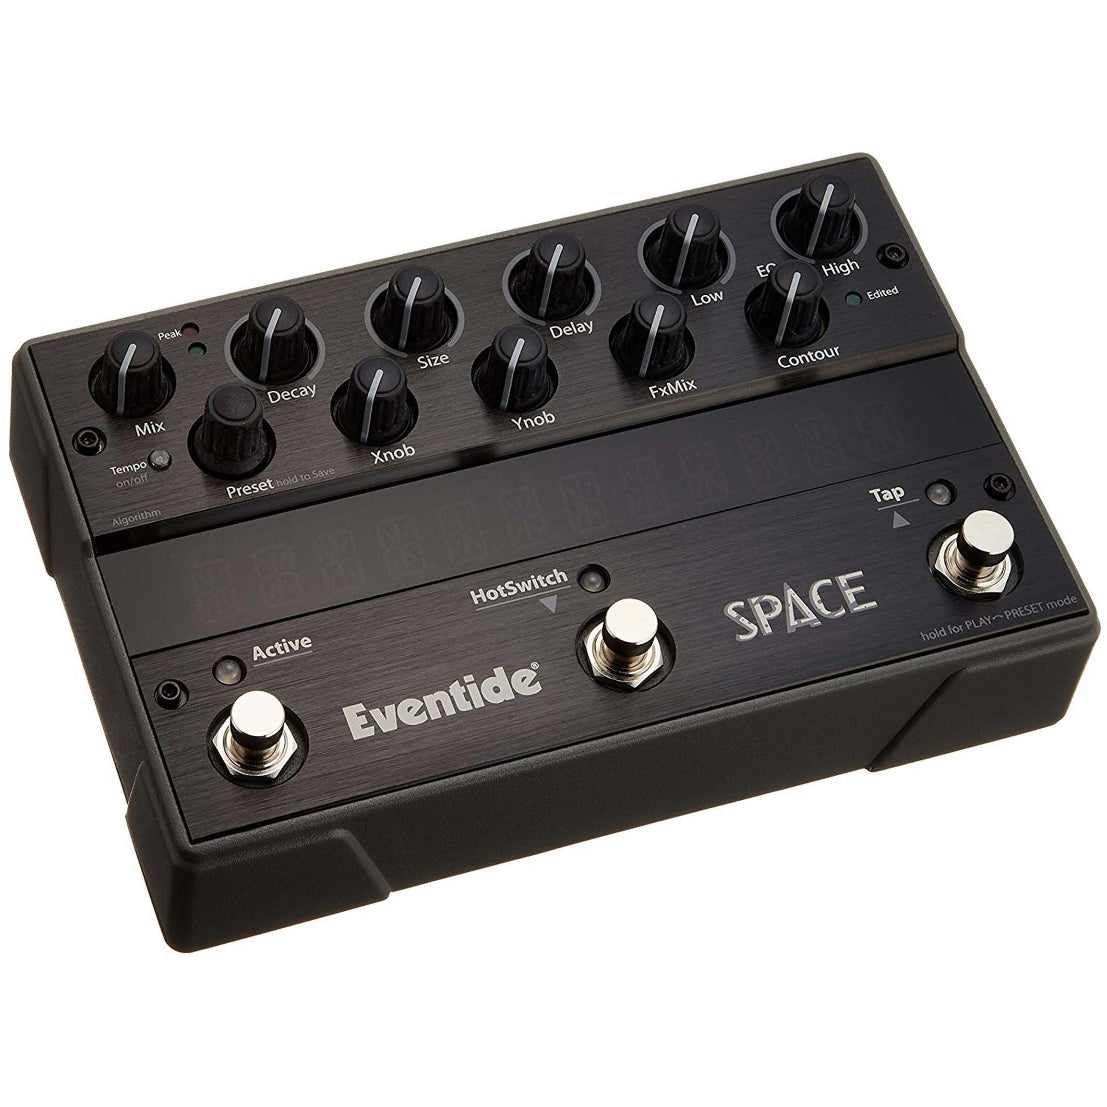 Eventide Space Reverb & Beyond Stomp Box Guitar Multi Effect Pedal